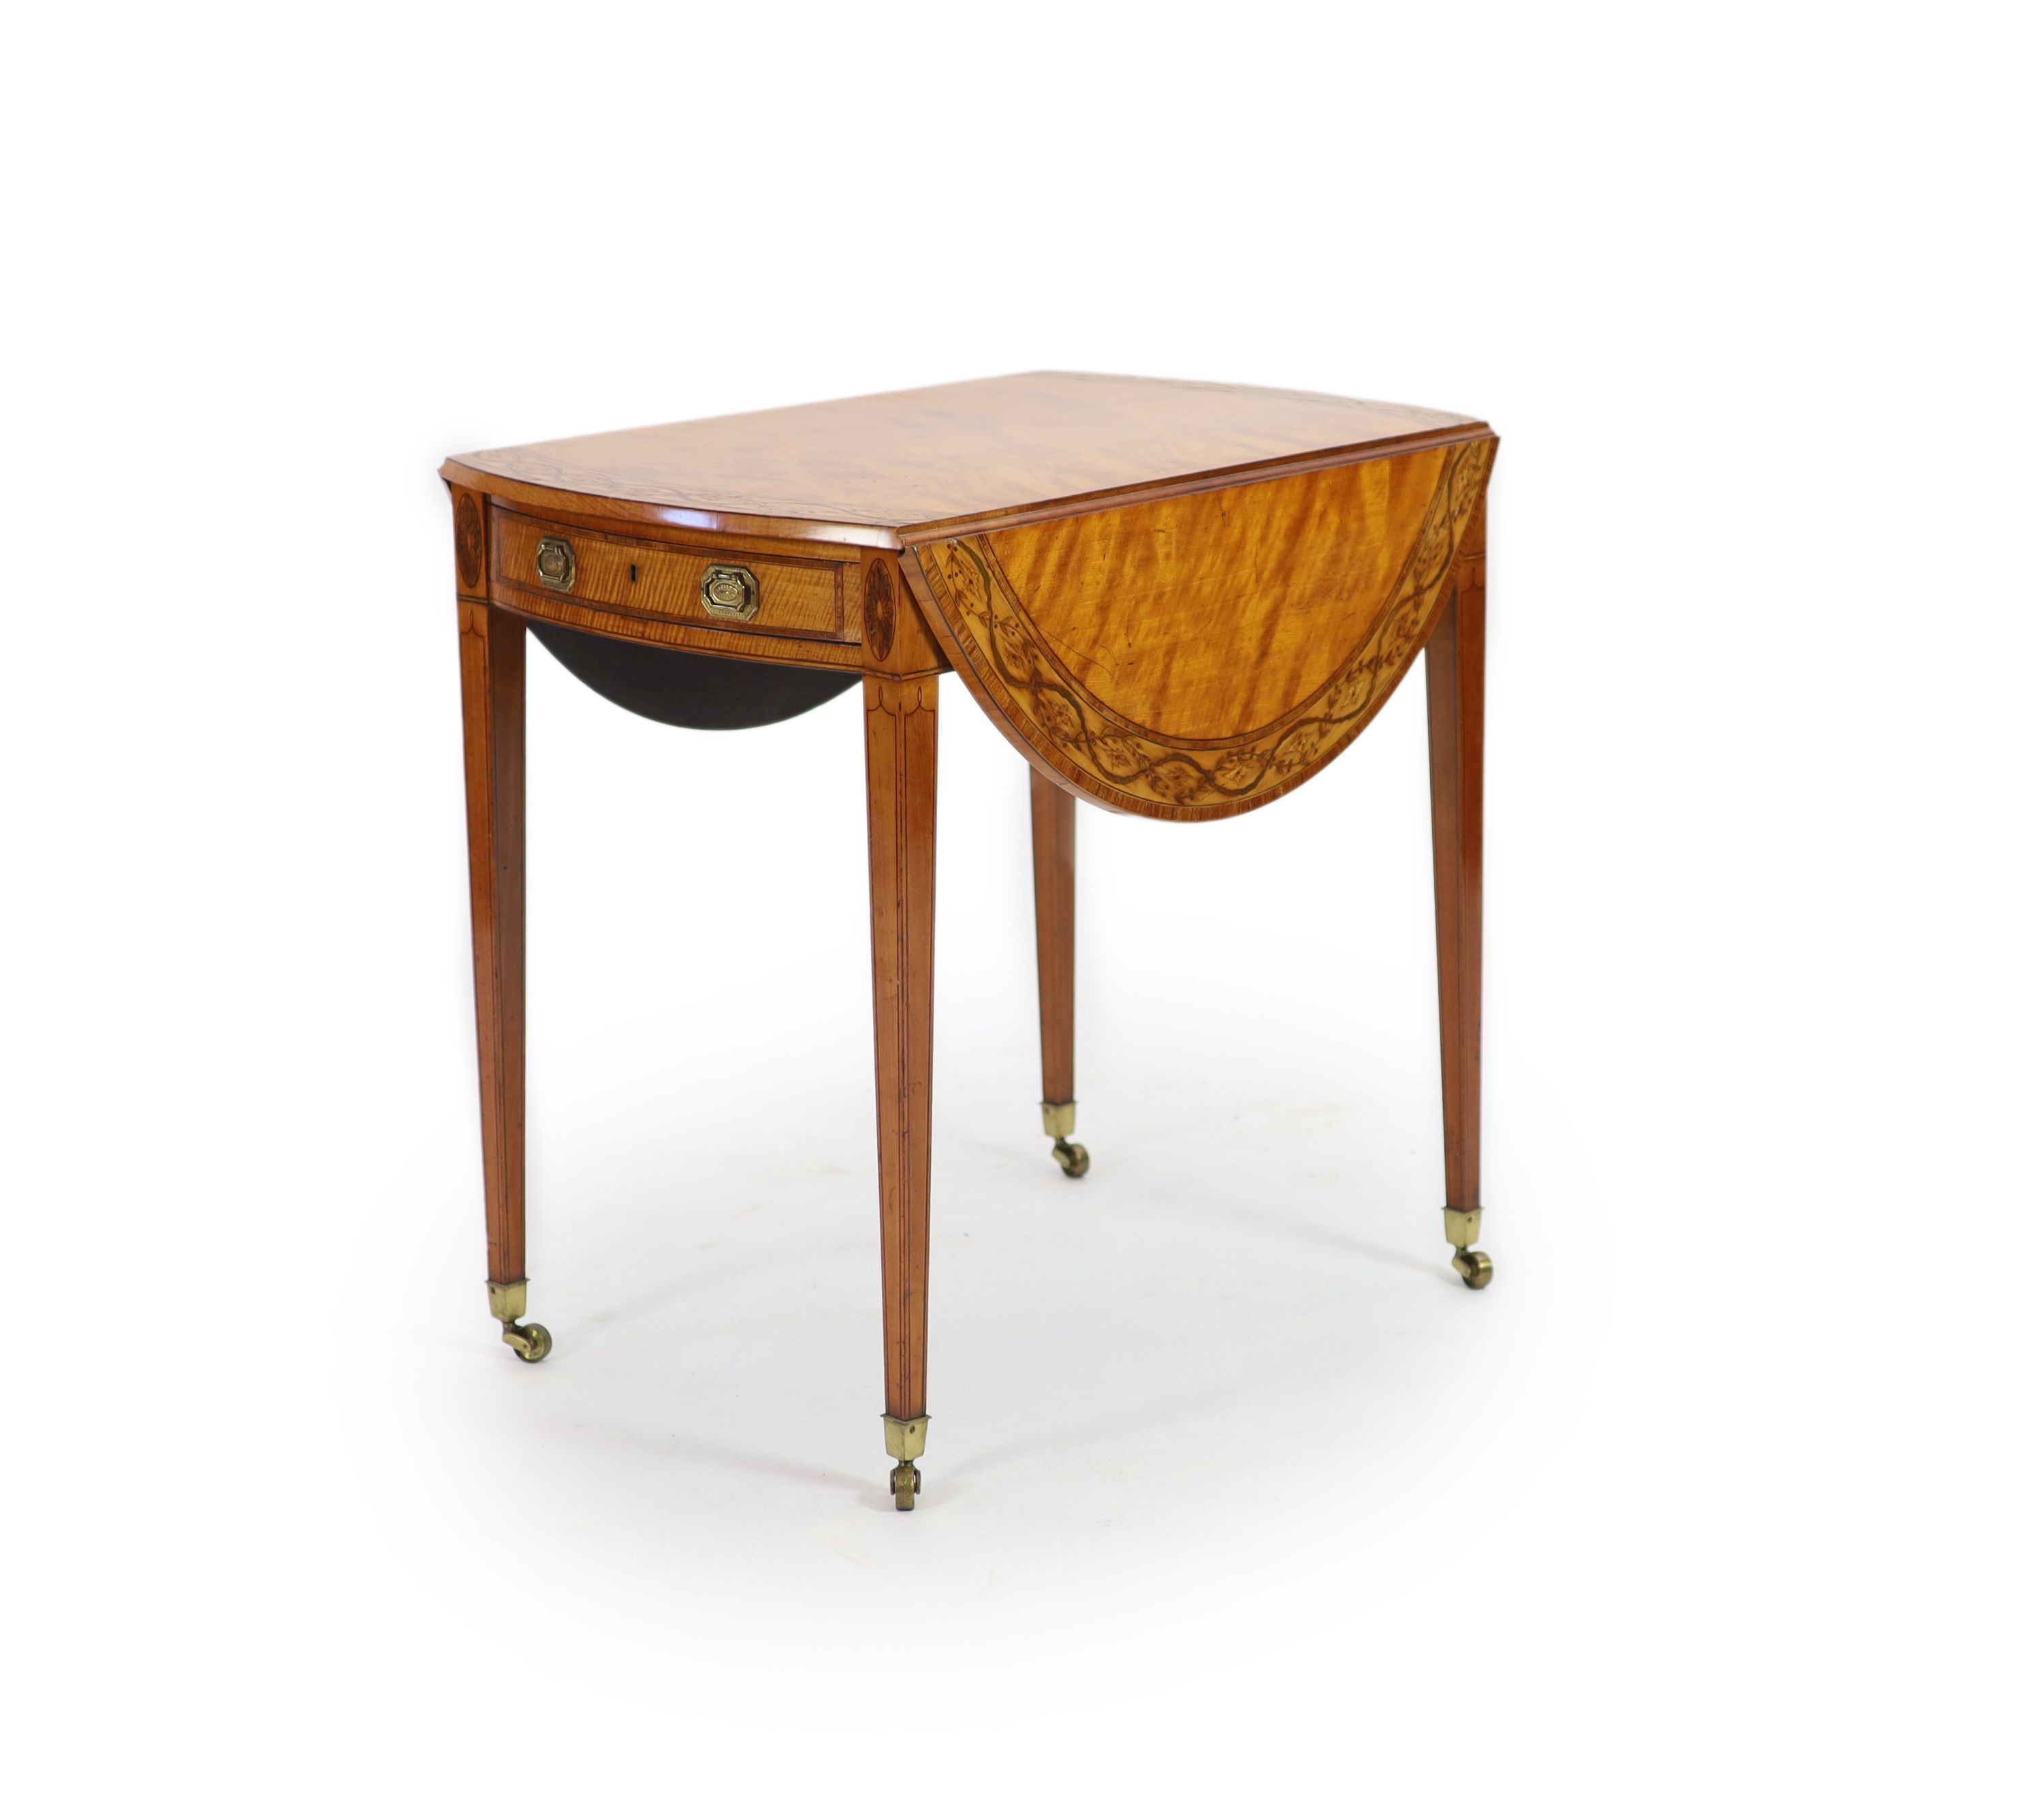 A George III Sheraton style marquetry inlaid satinwood Pembroke table, W 76cm D 52cm H 73cm